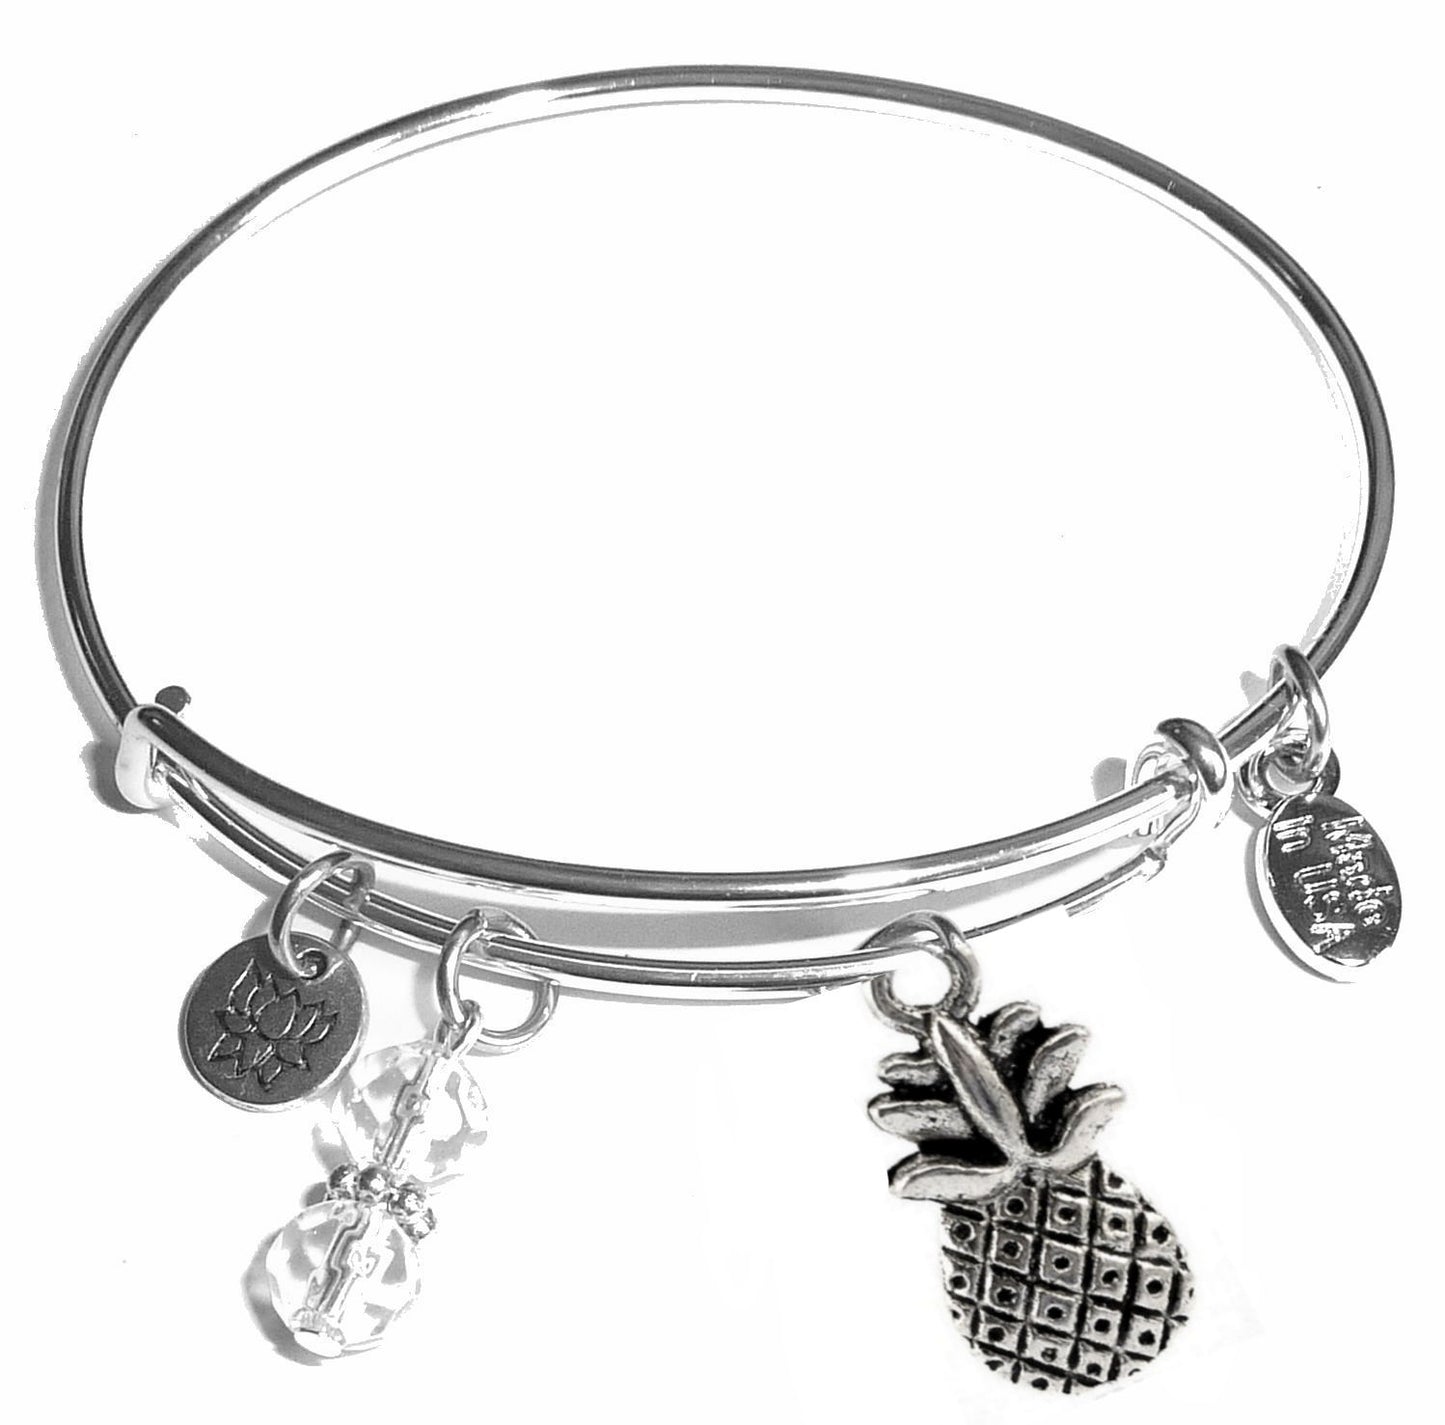 Pineapple - Message Bangle Bracelet - Expandable Wire Bracelet– Comes in a gift box